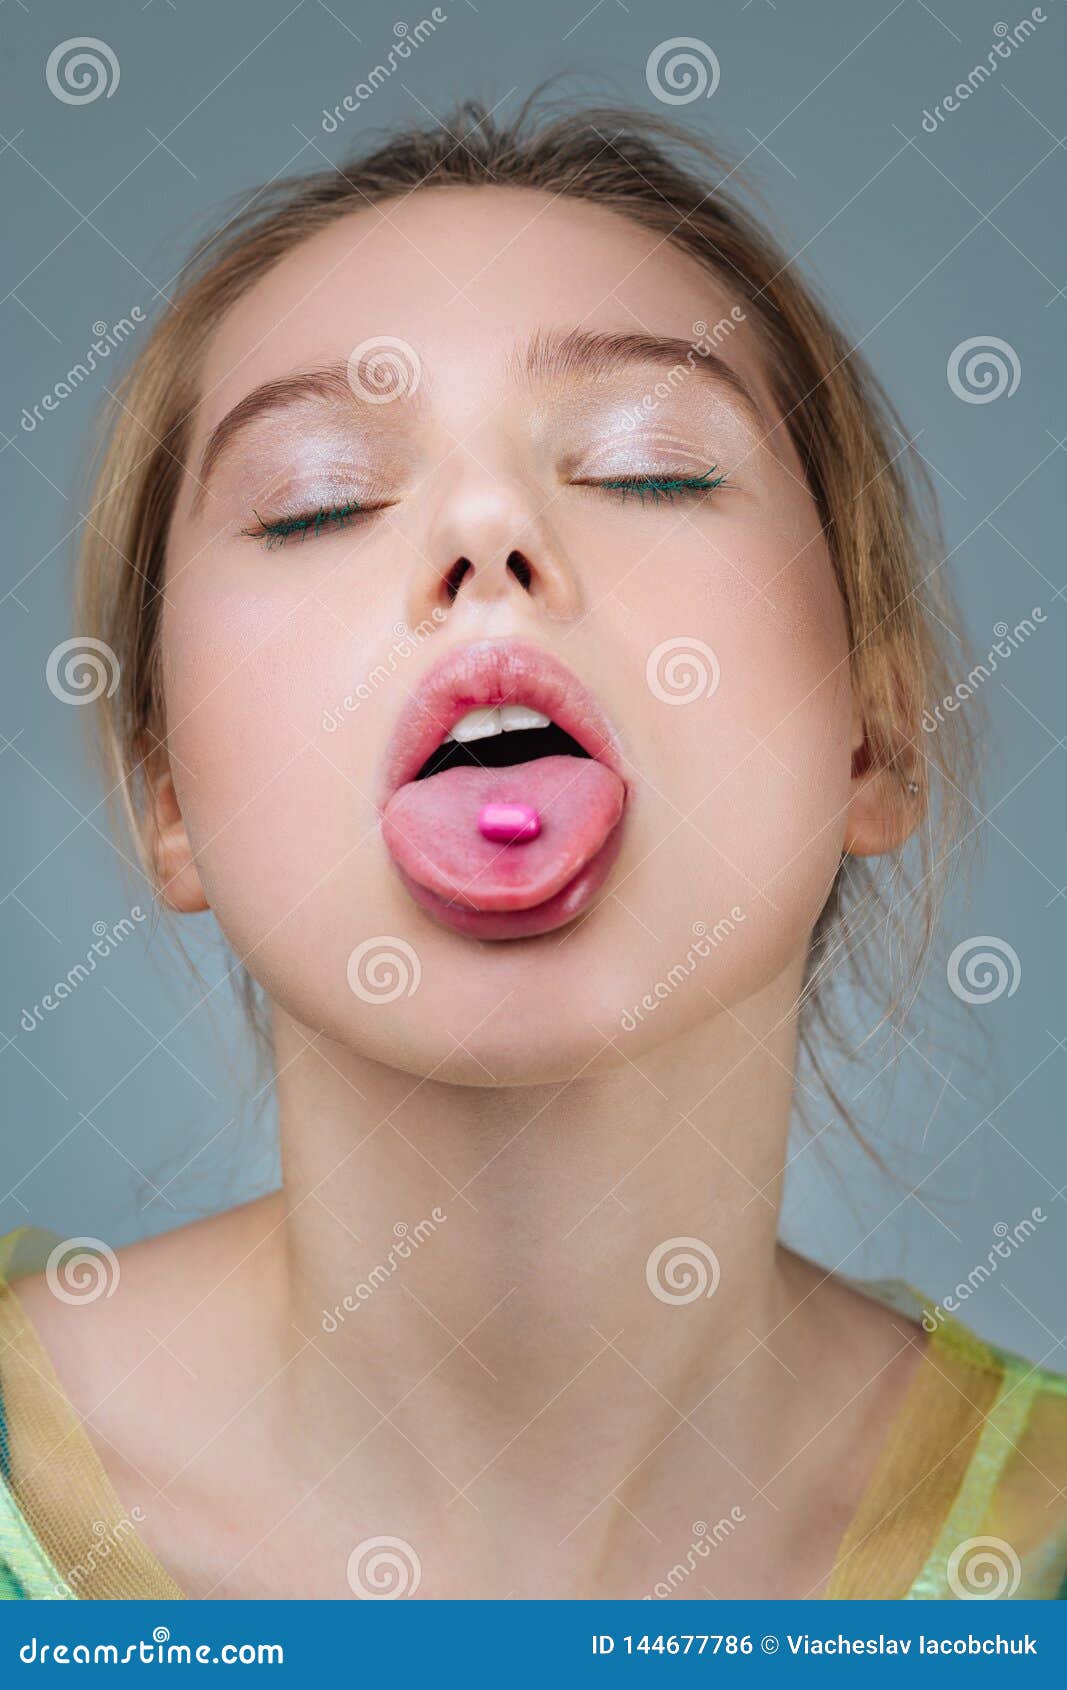 fair-haired model with natural makeup posing with open mouth